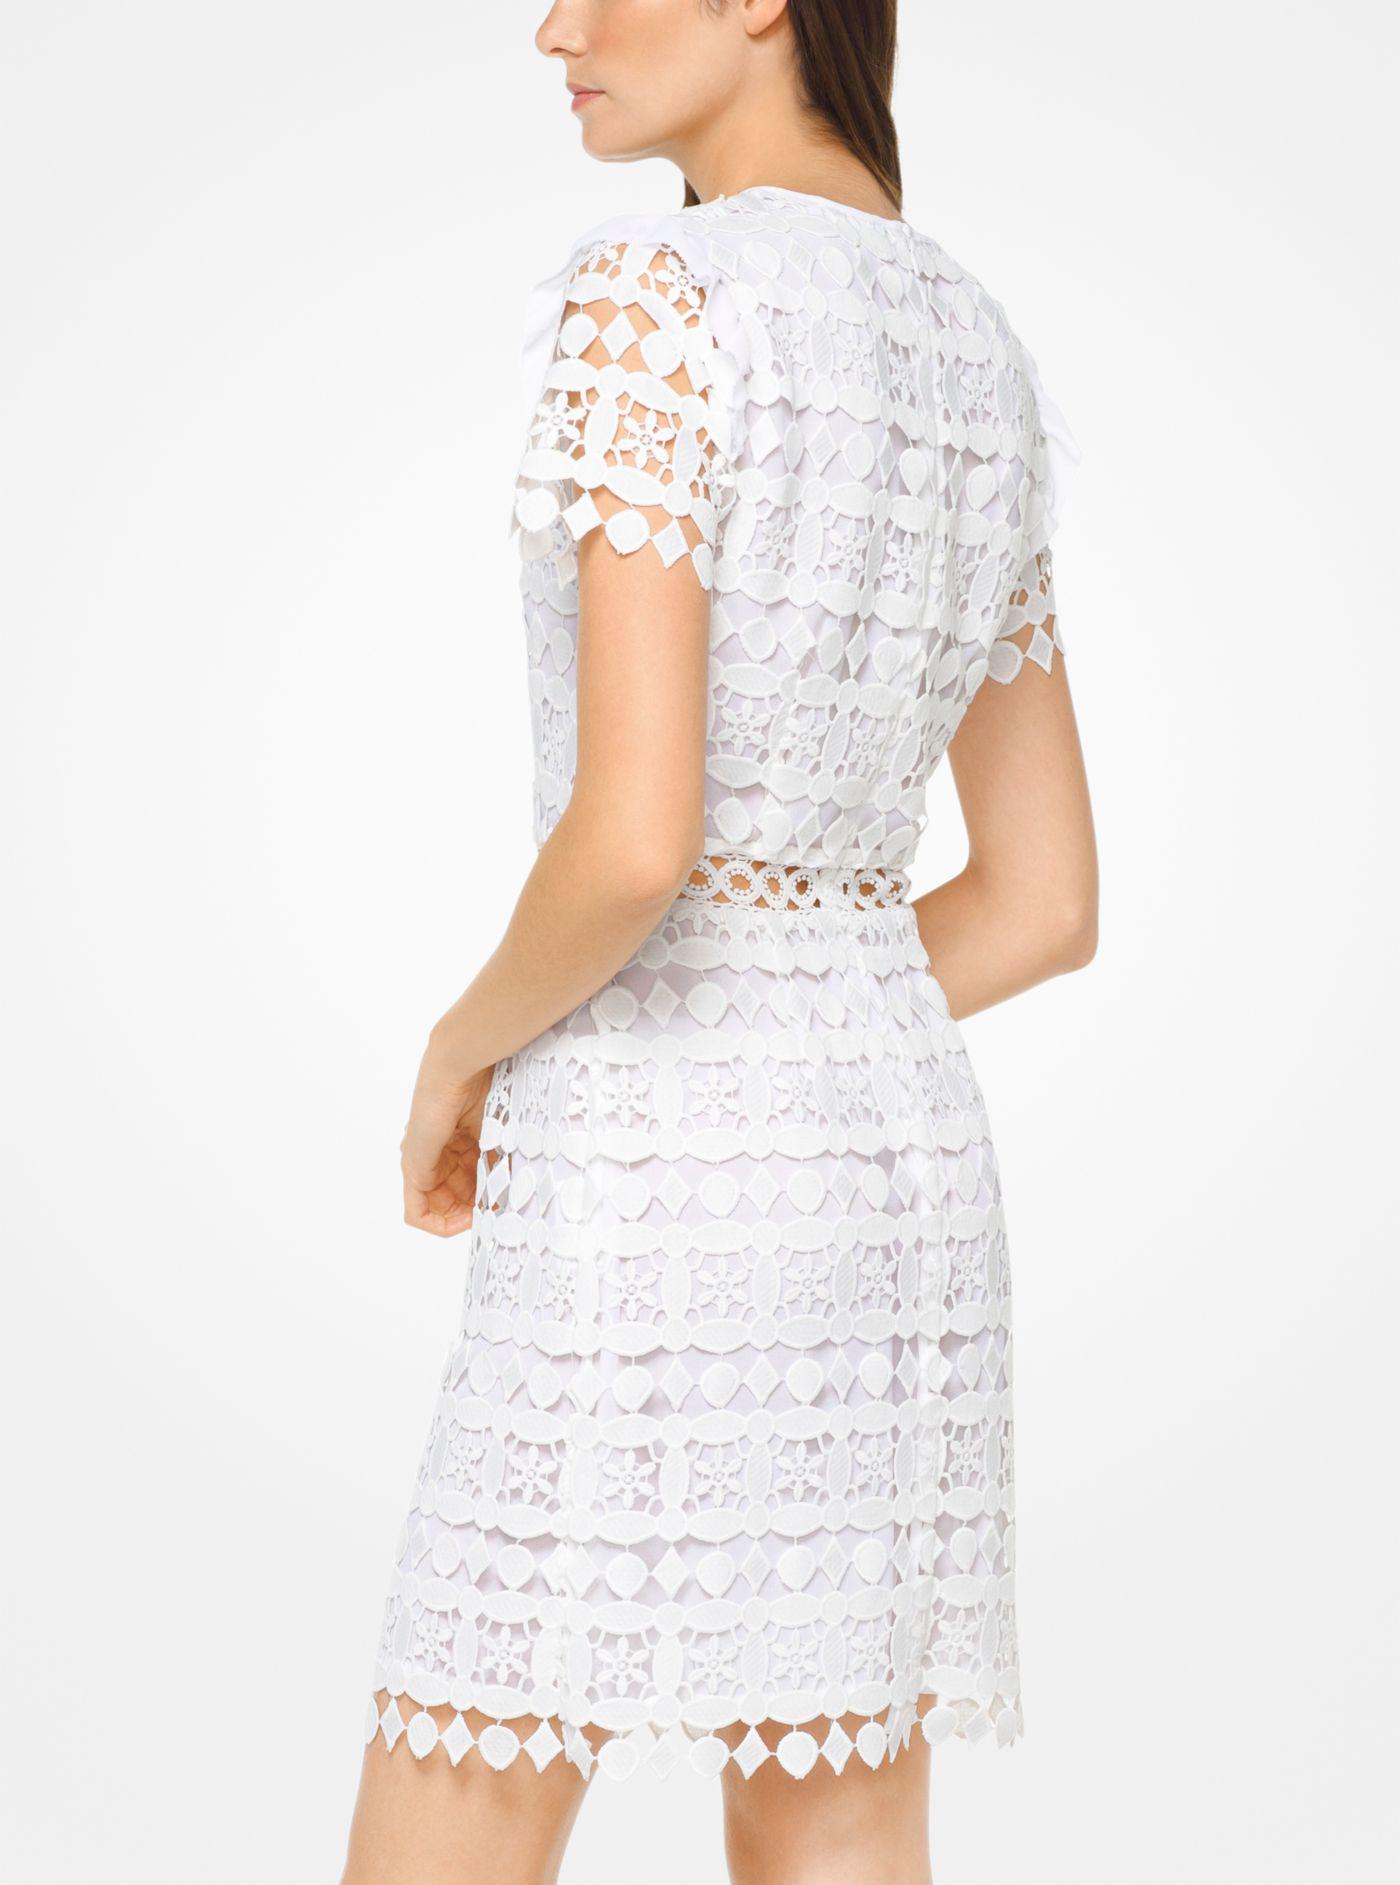 Michael Kors Geometric Floral Lace Dress in White | Lyst